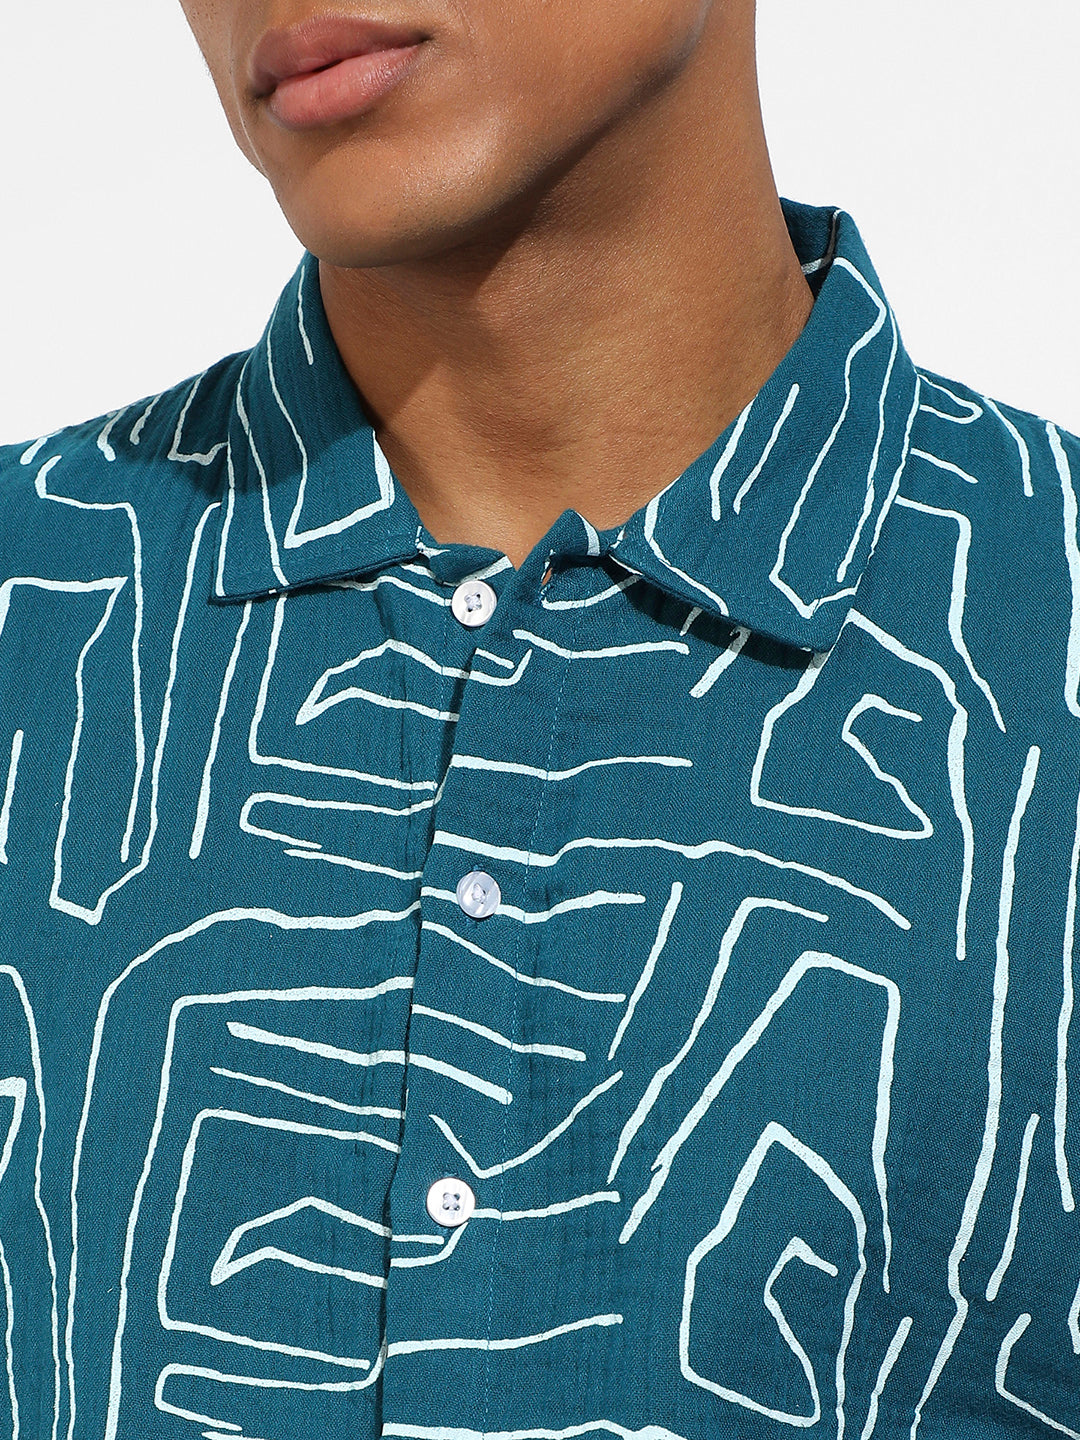 Men's Teal Blue Abstract Lines Print Shirt